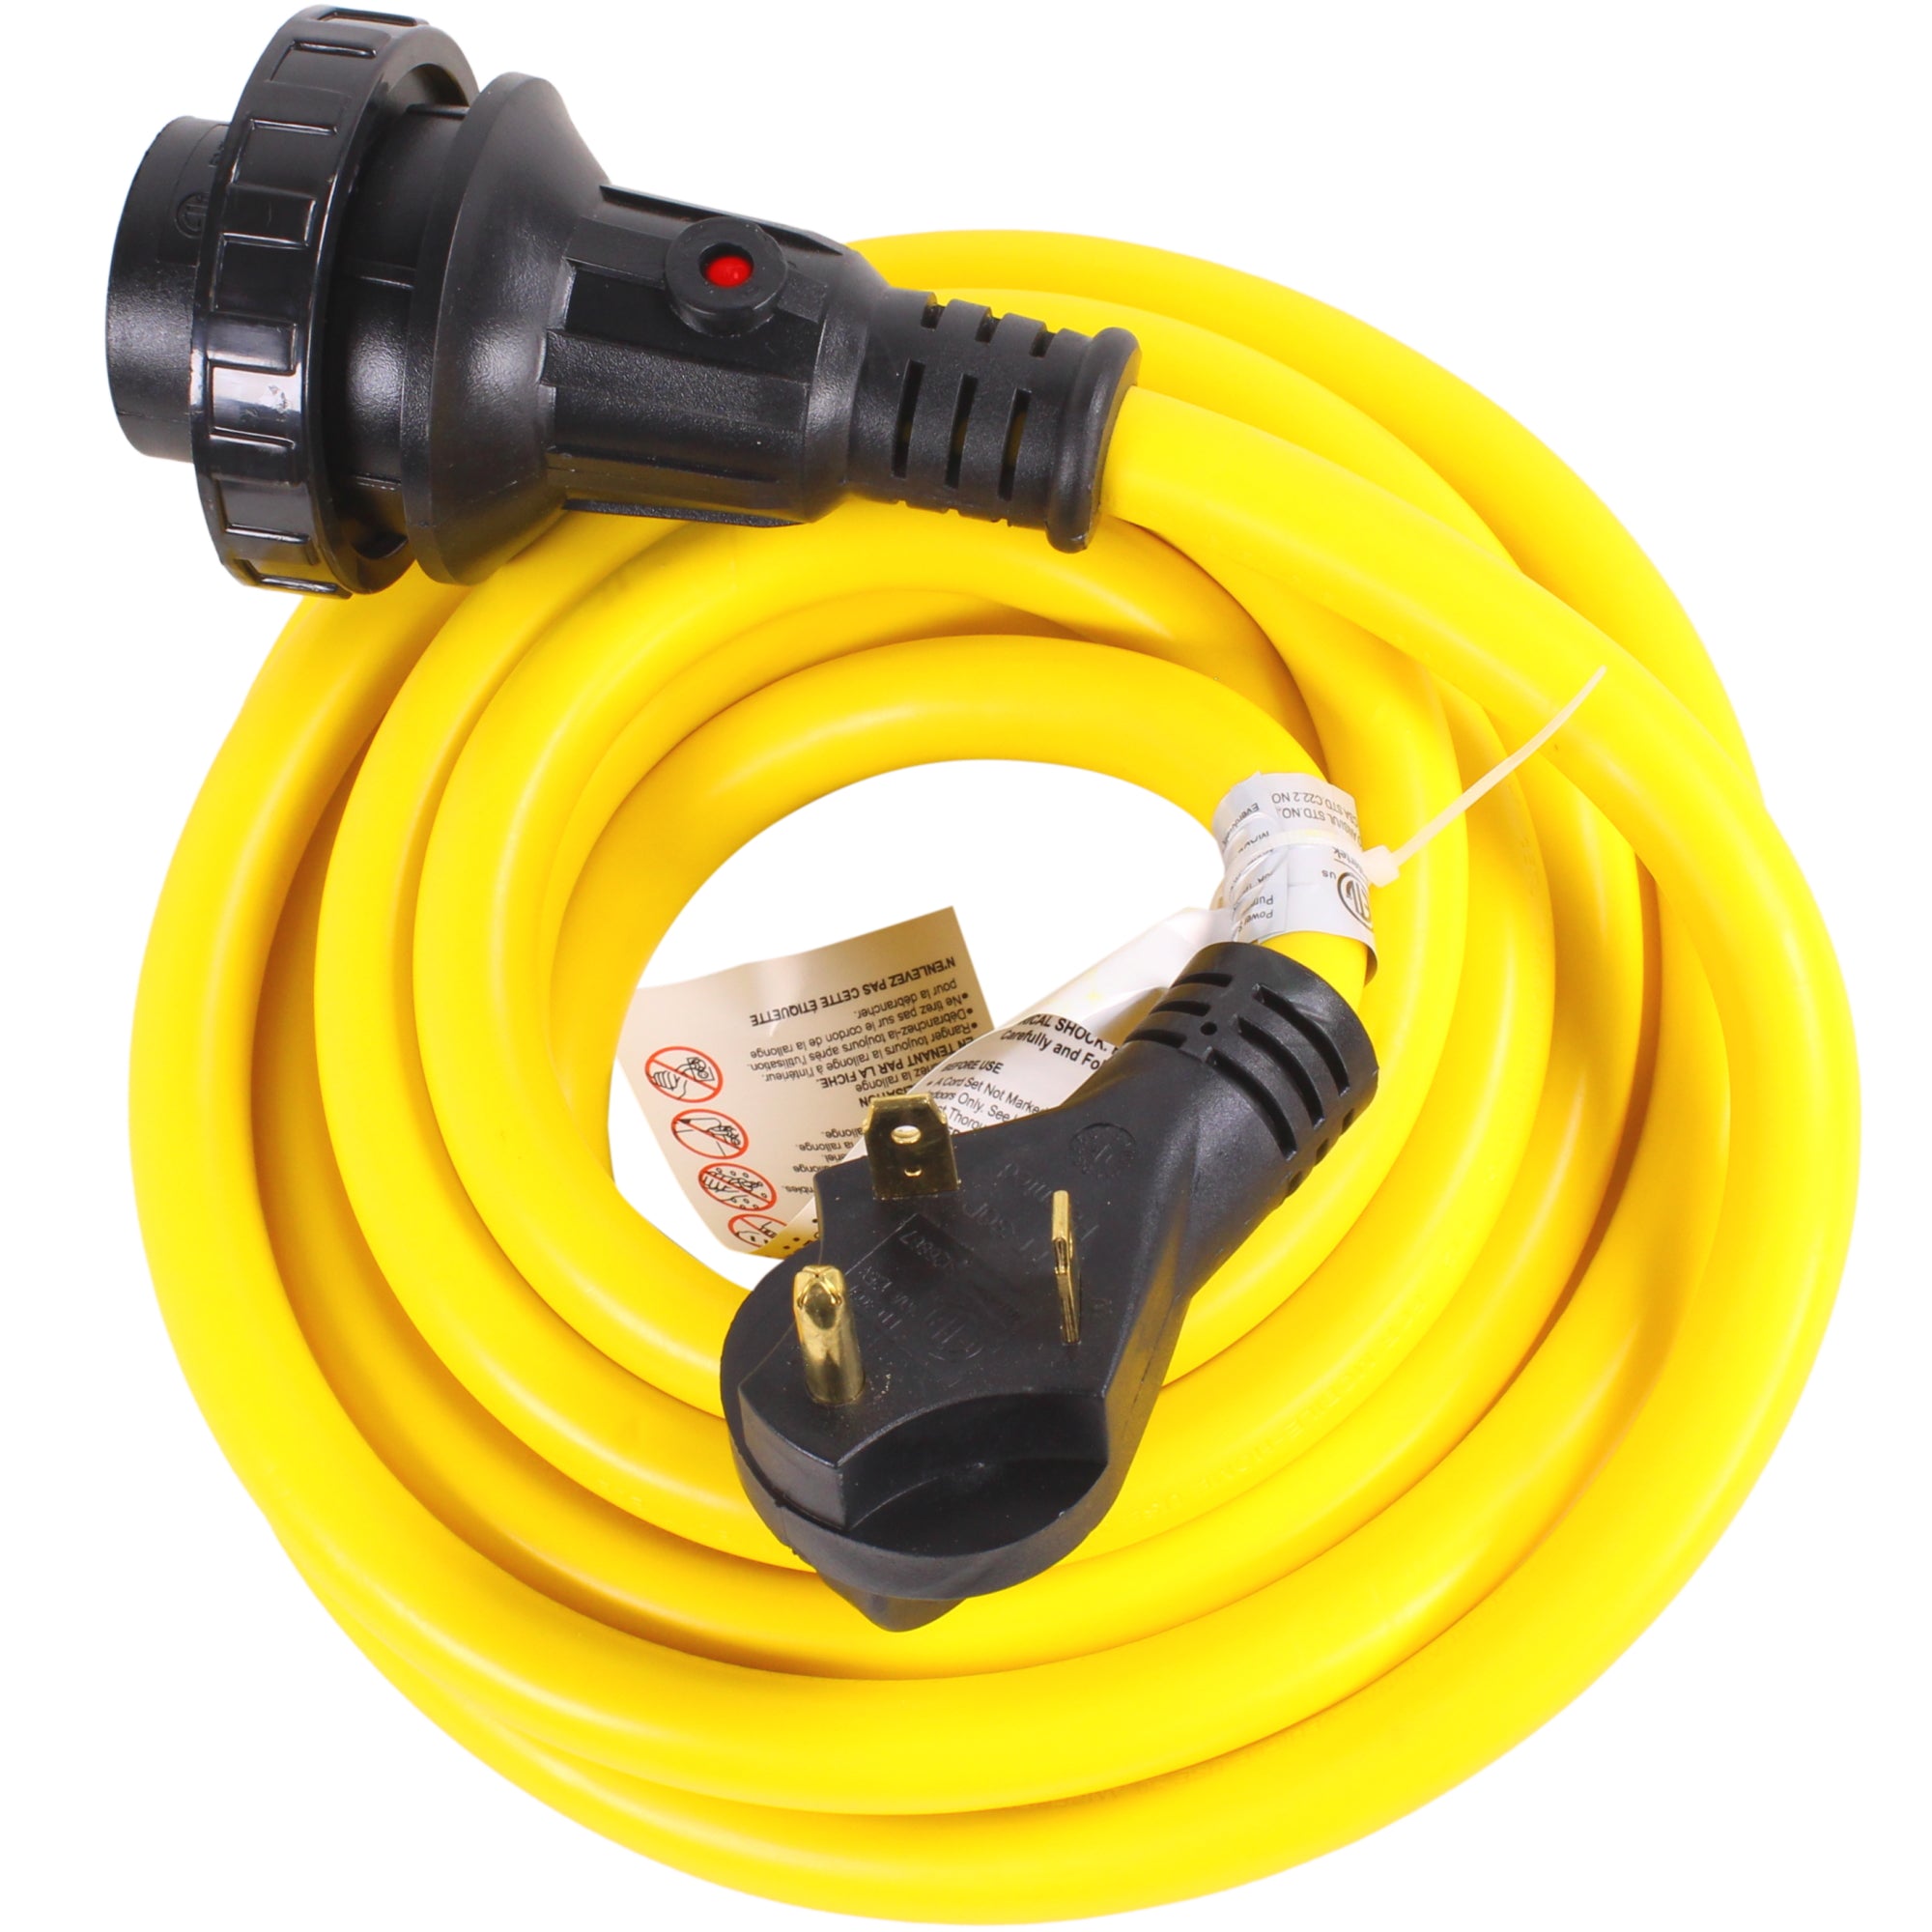 30A 50FT RV Power Extension Cord L530 Locking Female (Safety Yellow), –  Journeyman-Pro